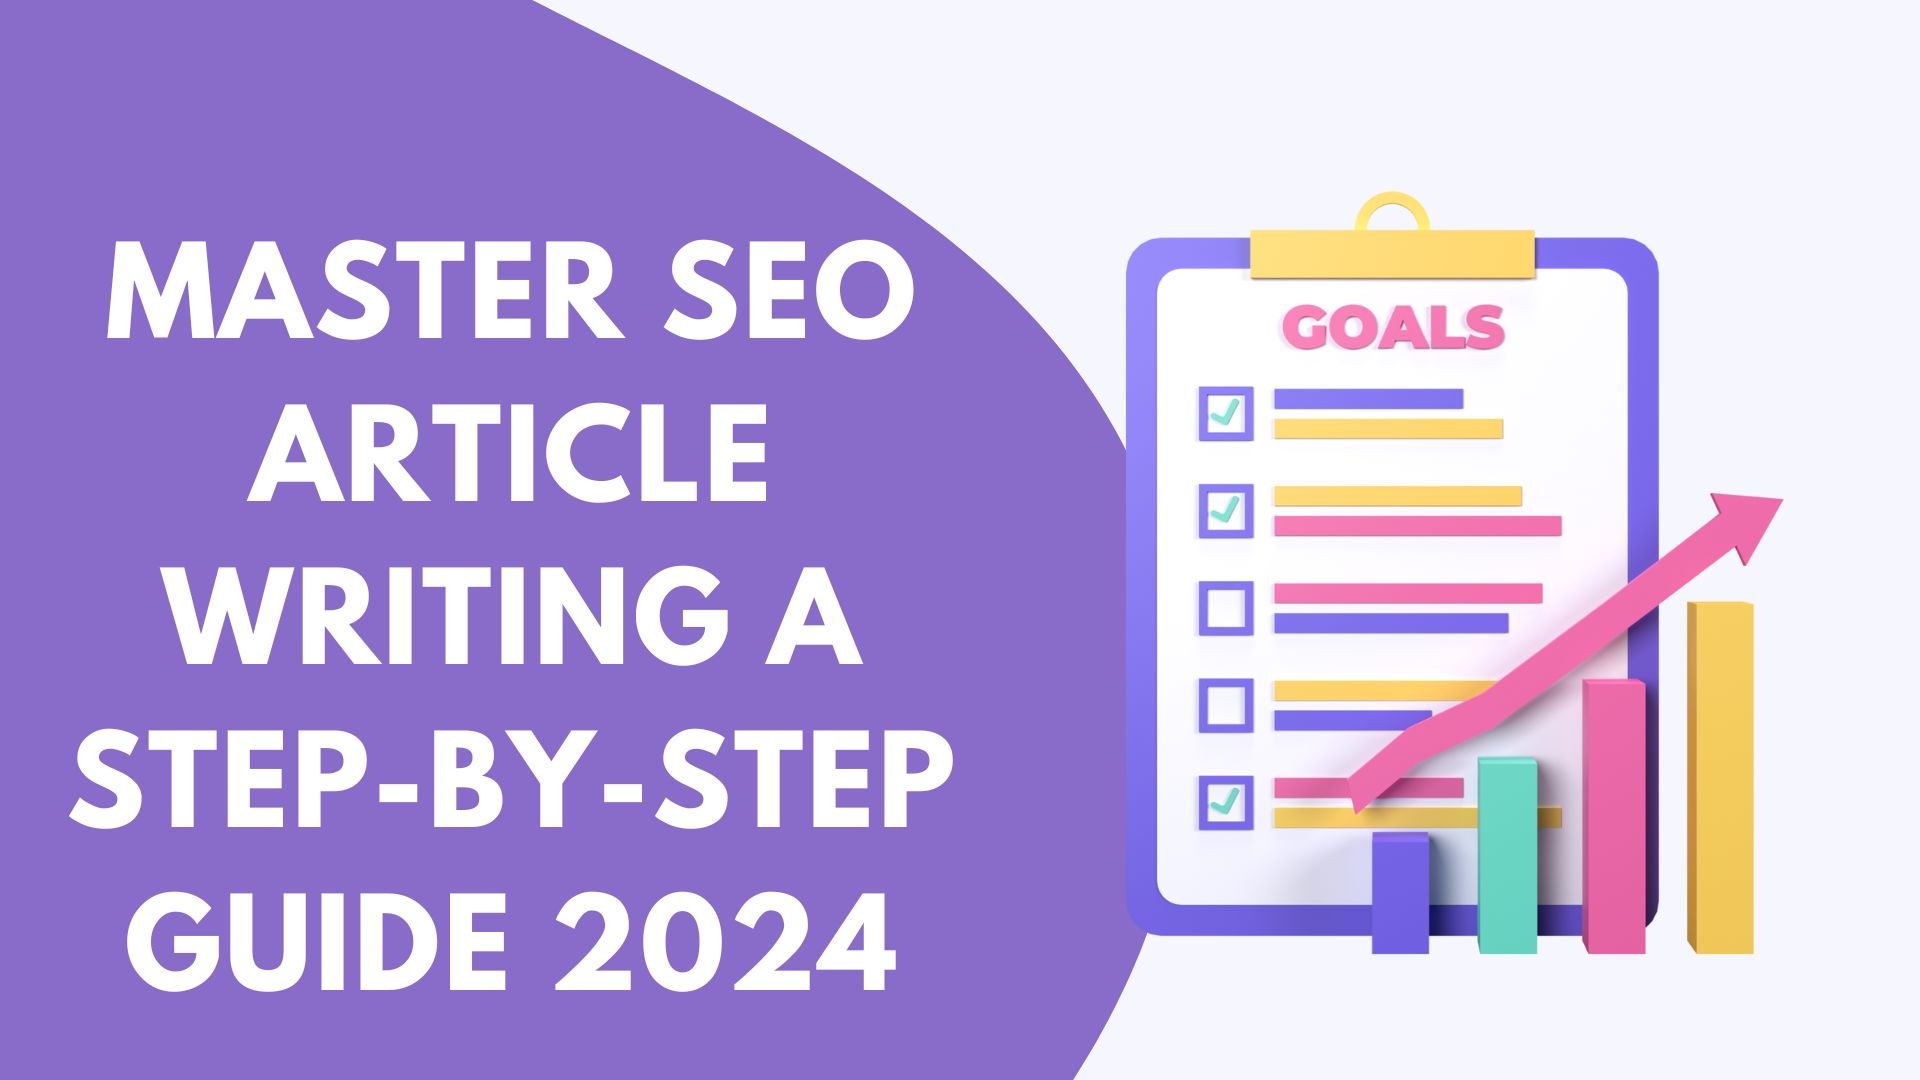 Master Seo Article Writing A Step-By-Step Guide 2024